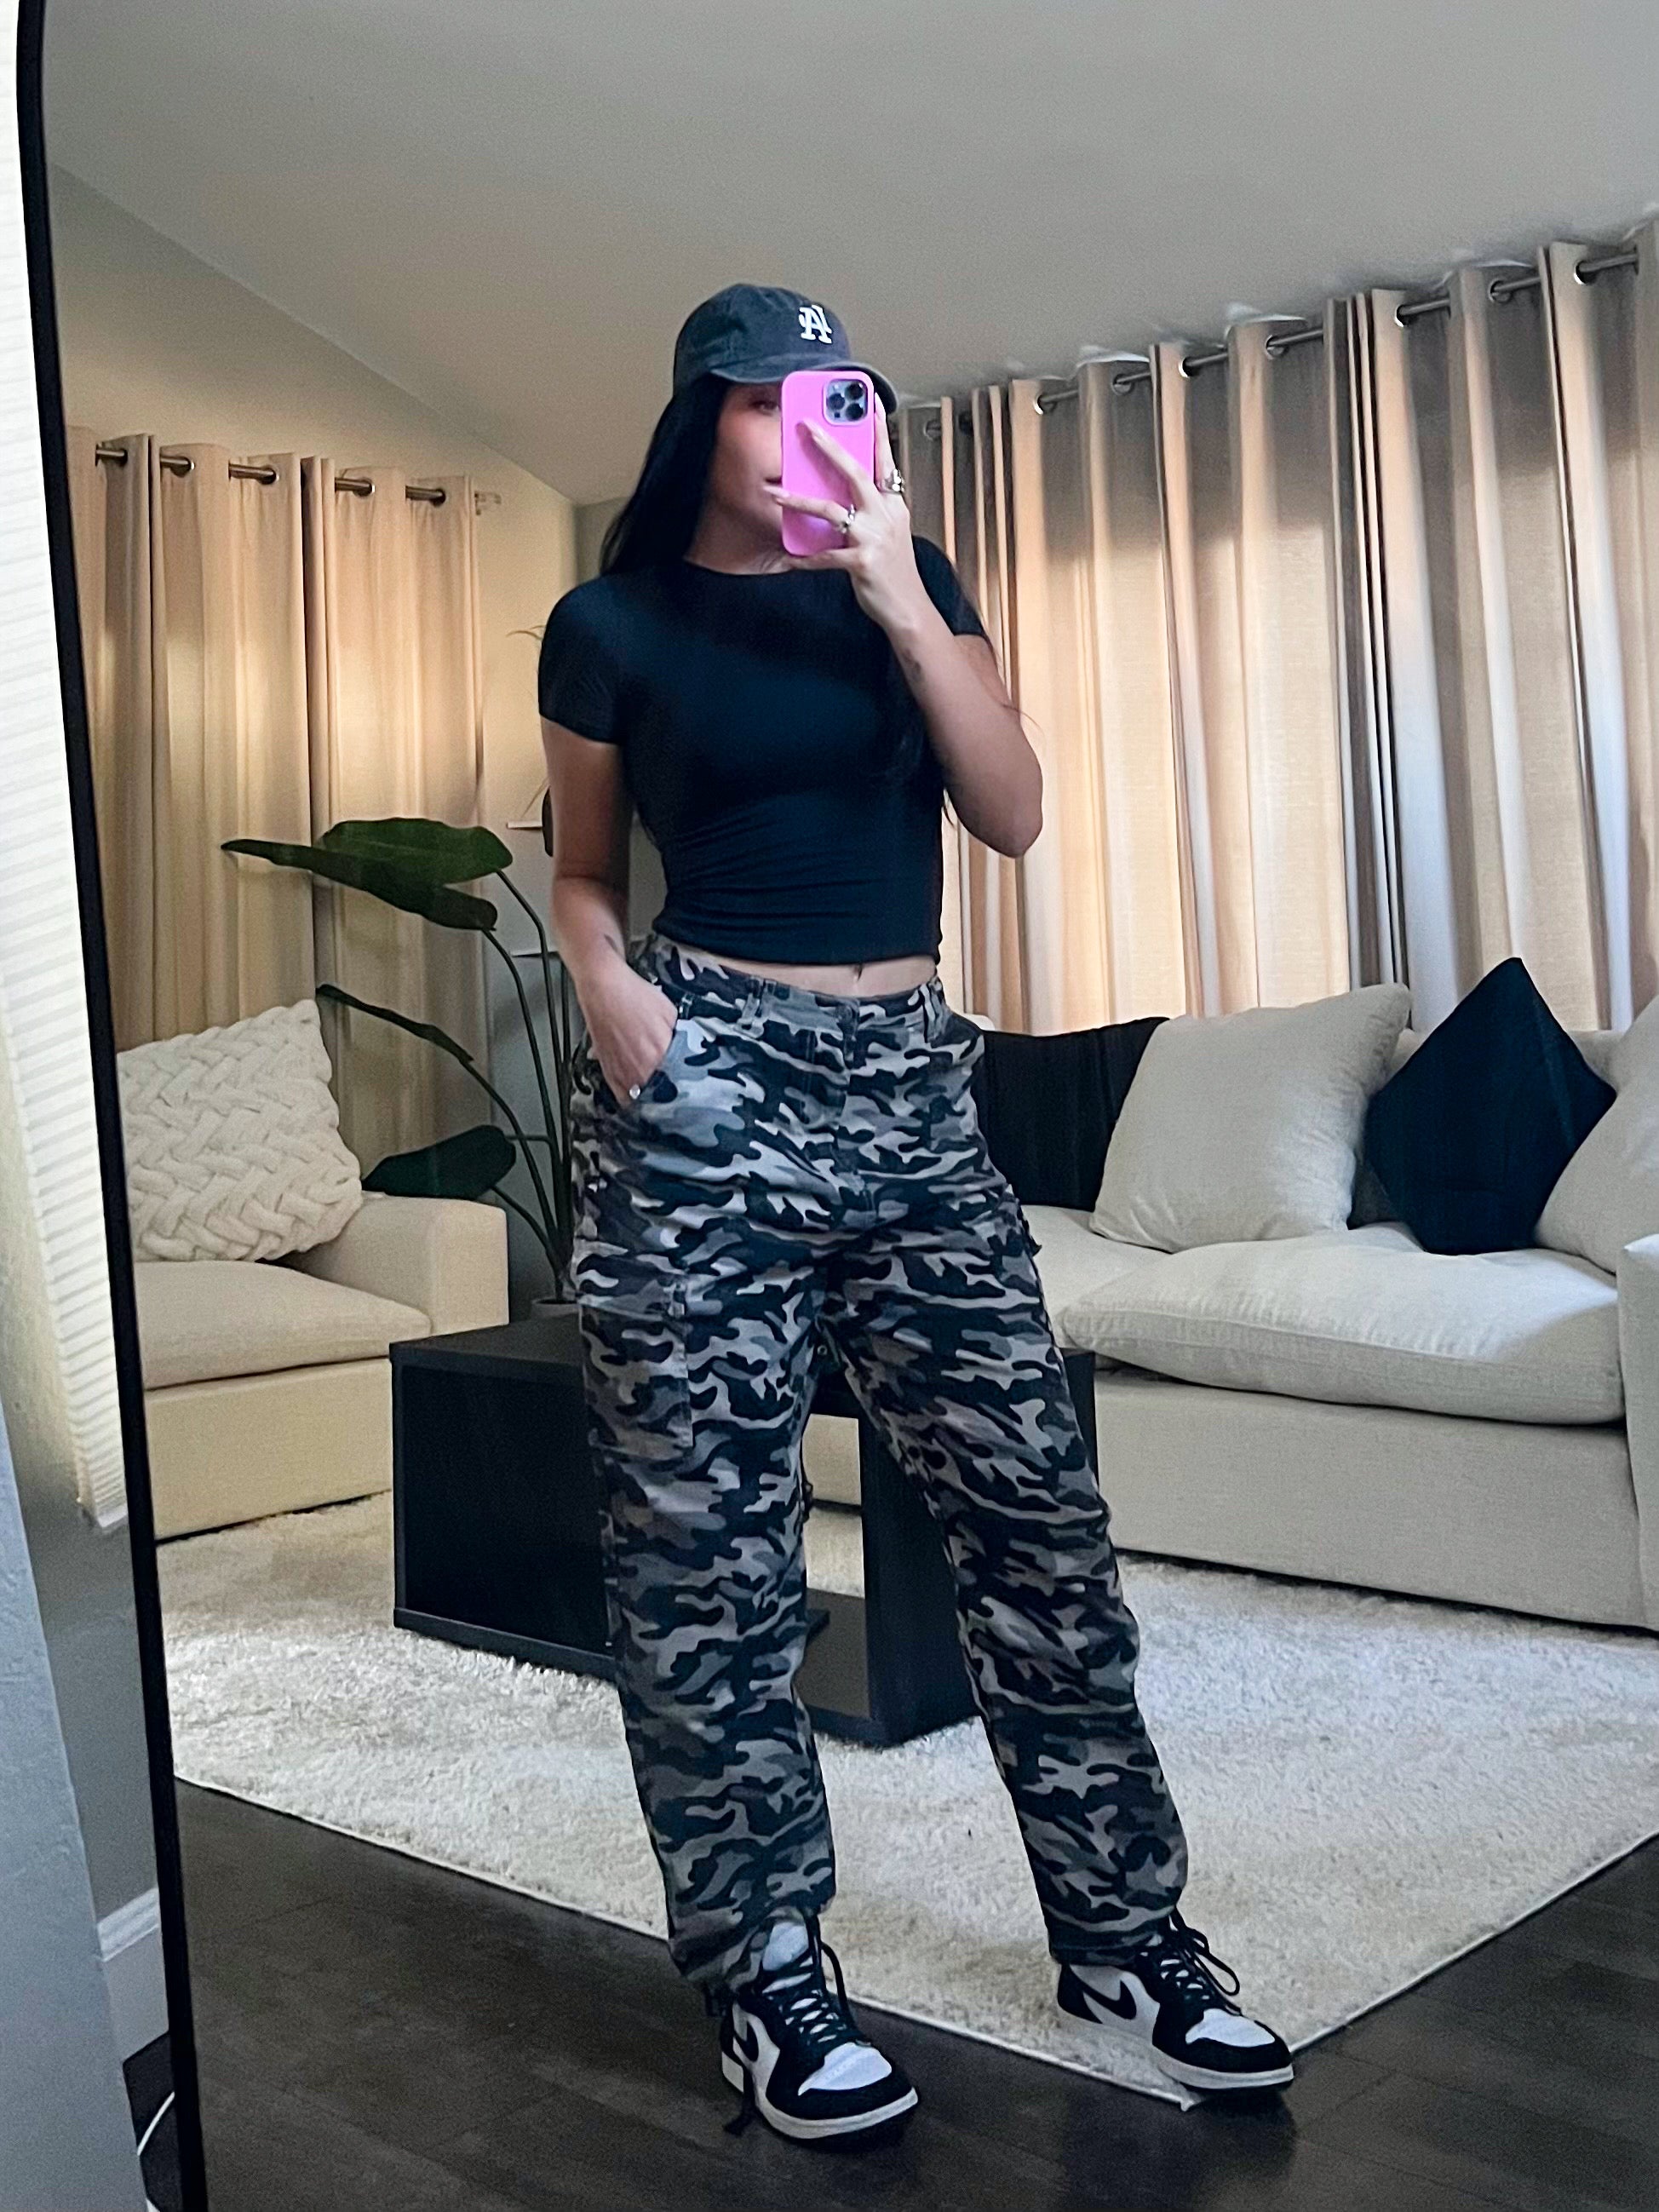 WHEN IN DOUBT THRIFT IT  FALL STREET STYLE OUTFIT MILITARY CAMO PANTS